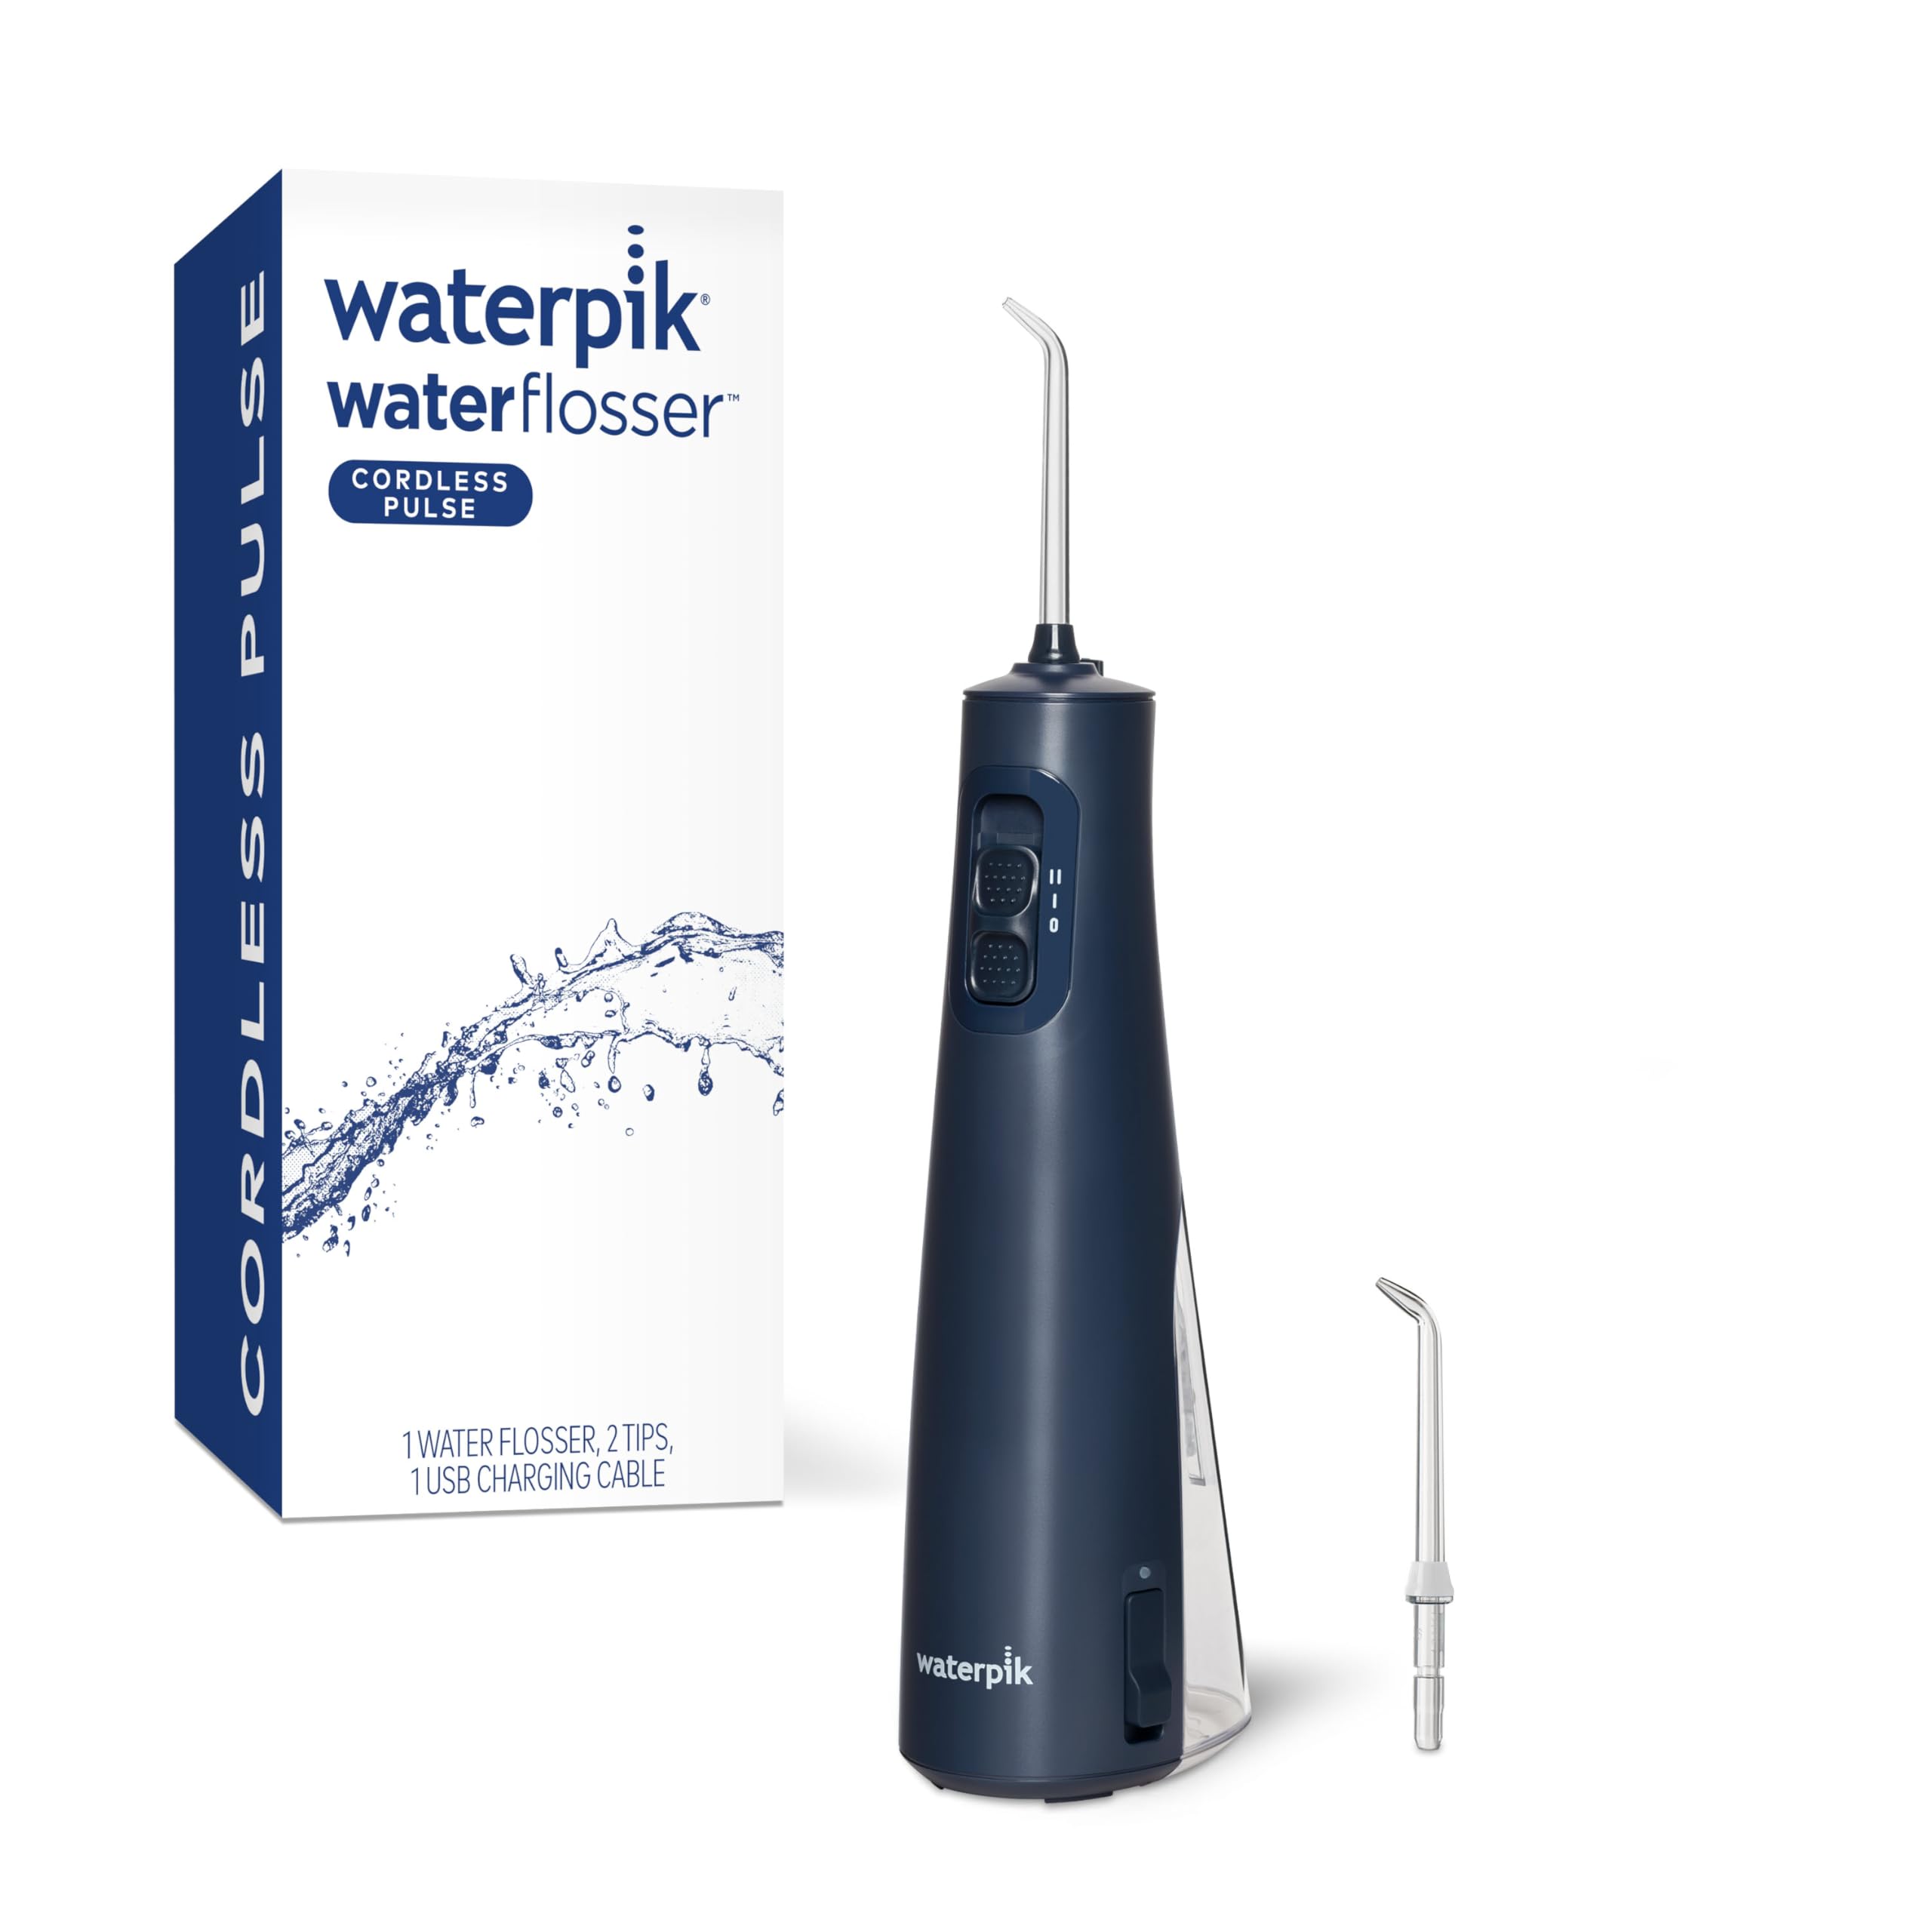 Waterpik Cordless Pulse Rechargeable Portable Water Flosser for Teeth, Gums, Braces Care and Travel with 2 Flossing Tips, Waterproof, ADA Accepted, WF-20 Blue